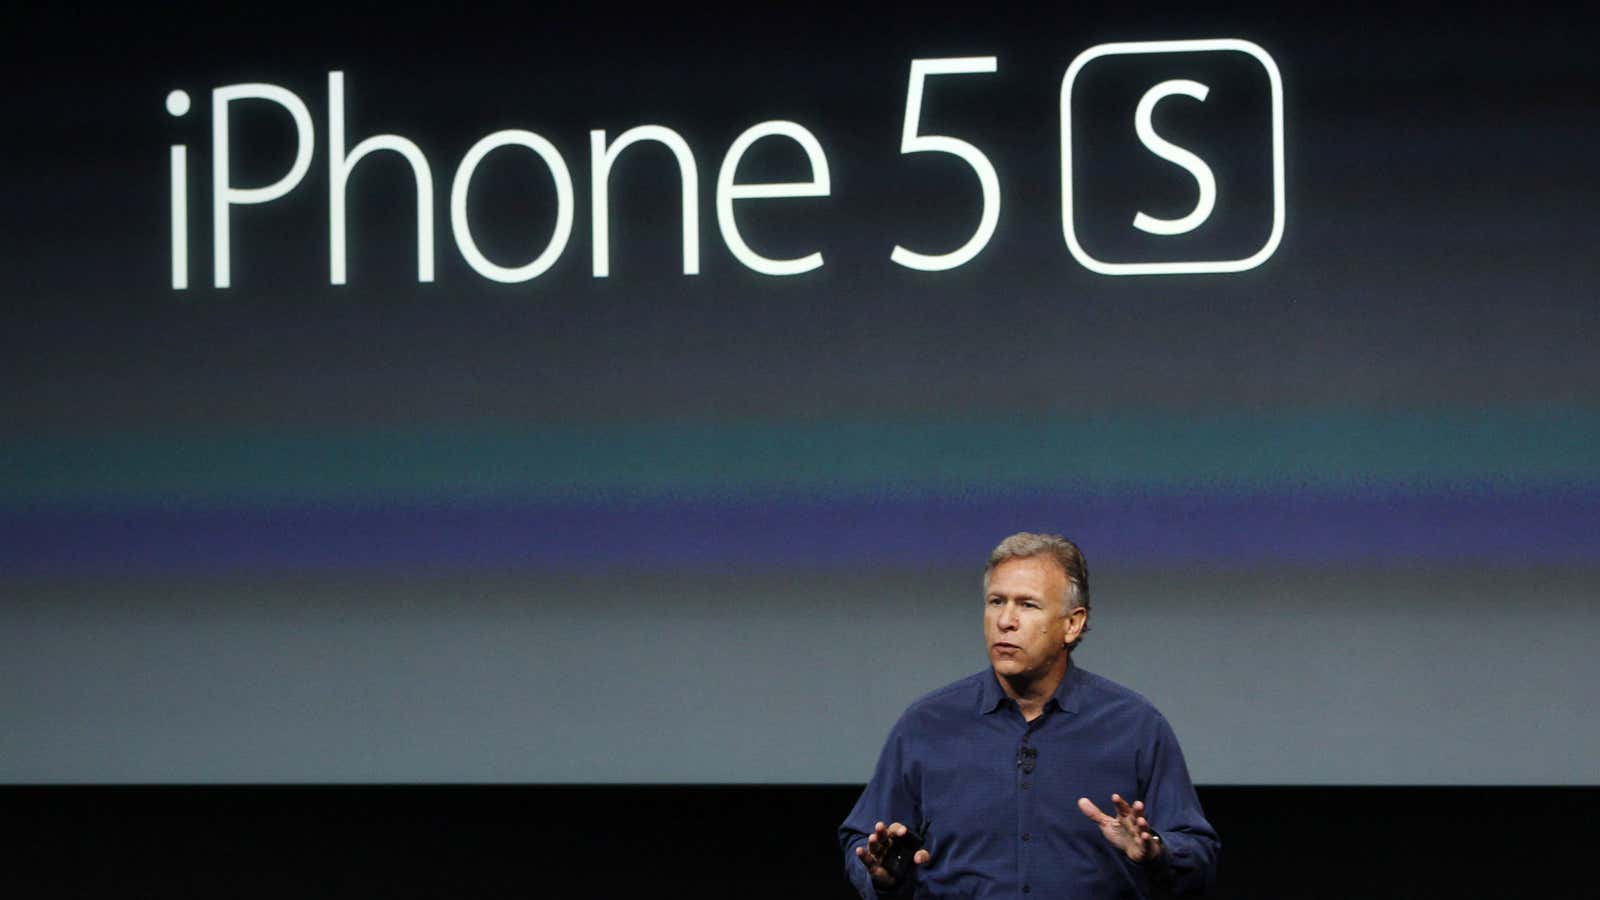 The iPhone 5S just brought us closer to the internet of things and a world of constant surveillance